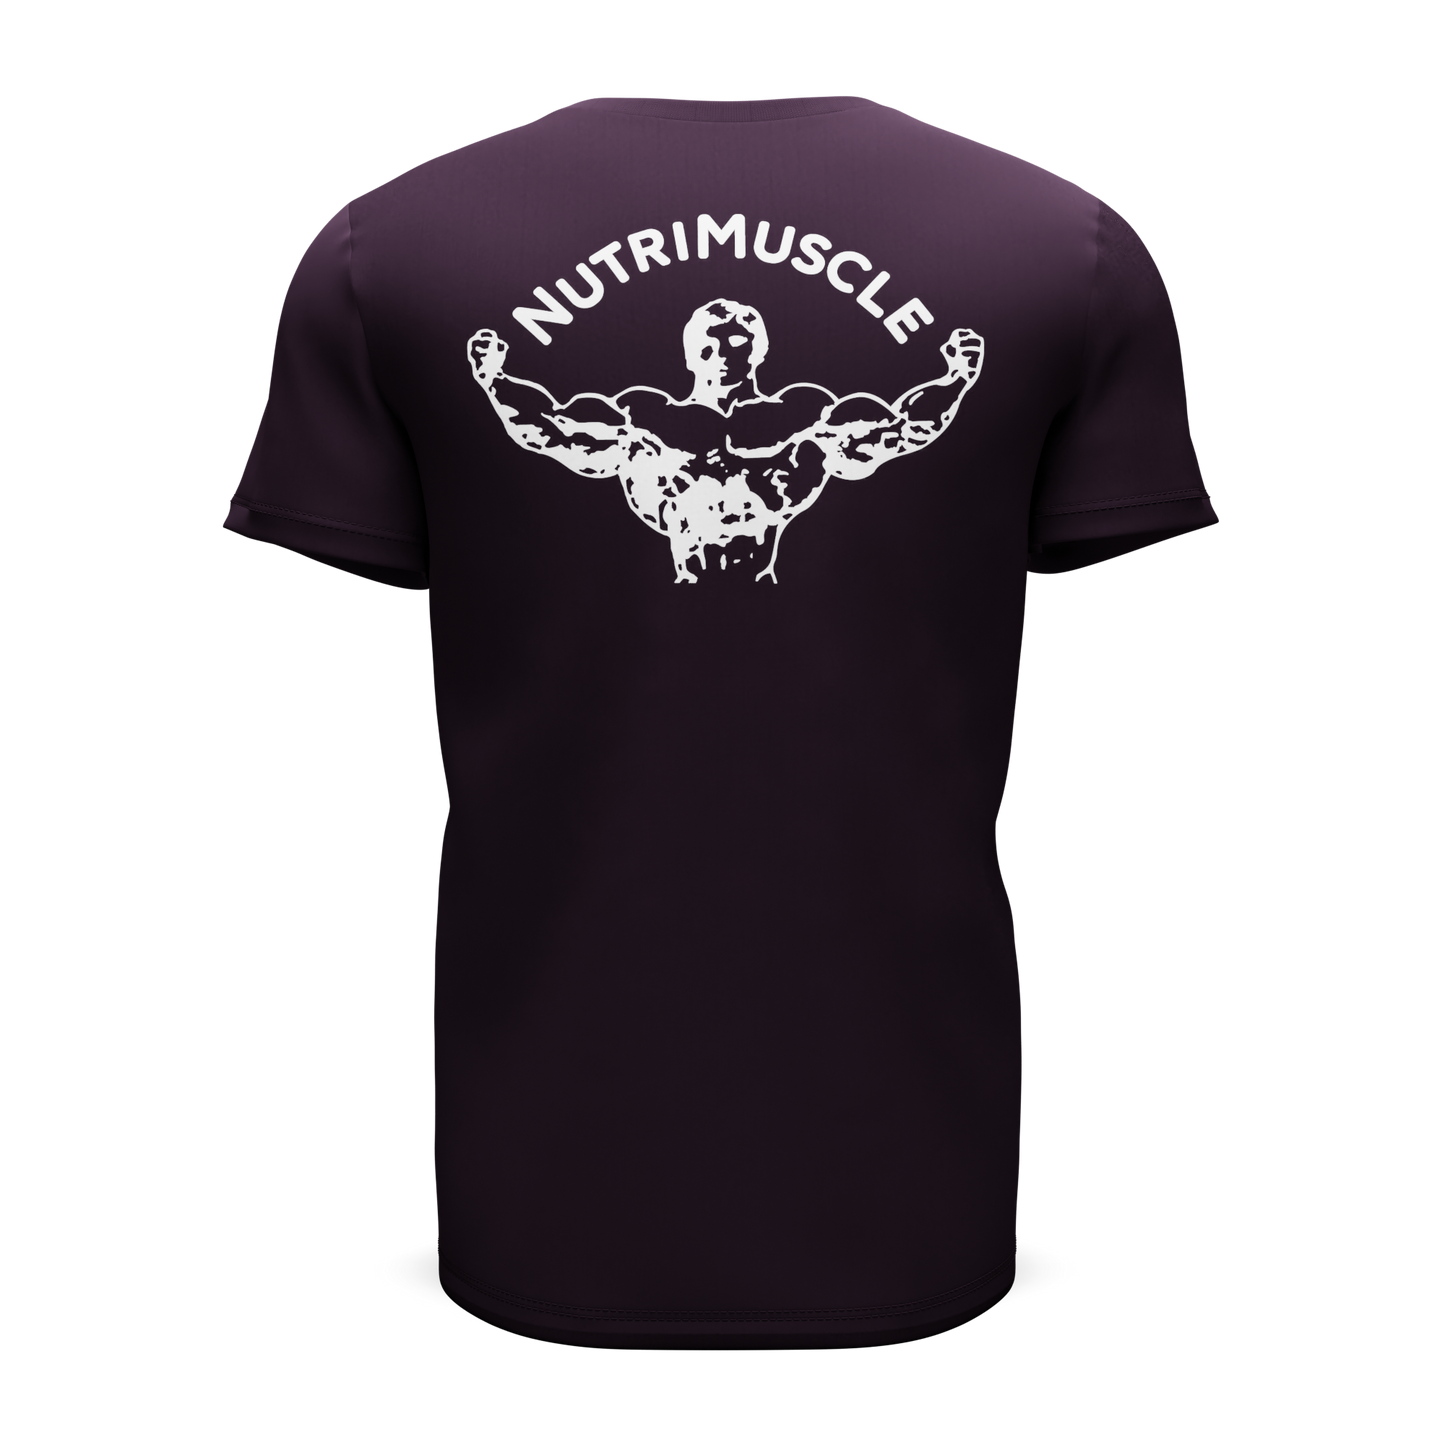 Nutrimuscle black t-shirt